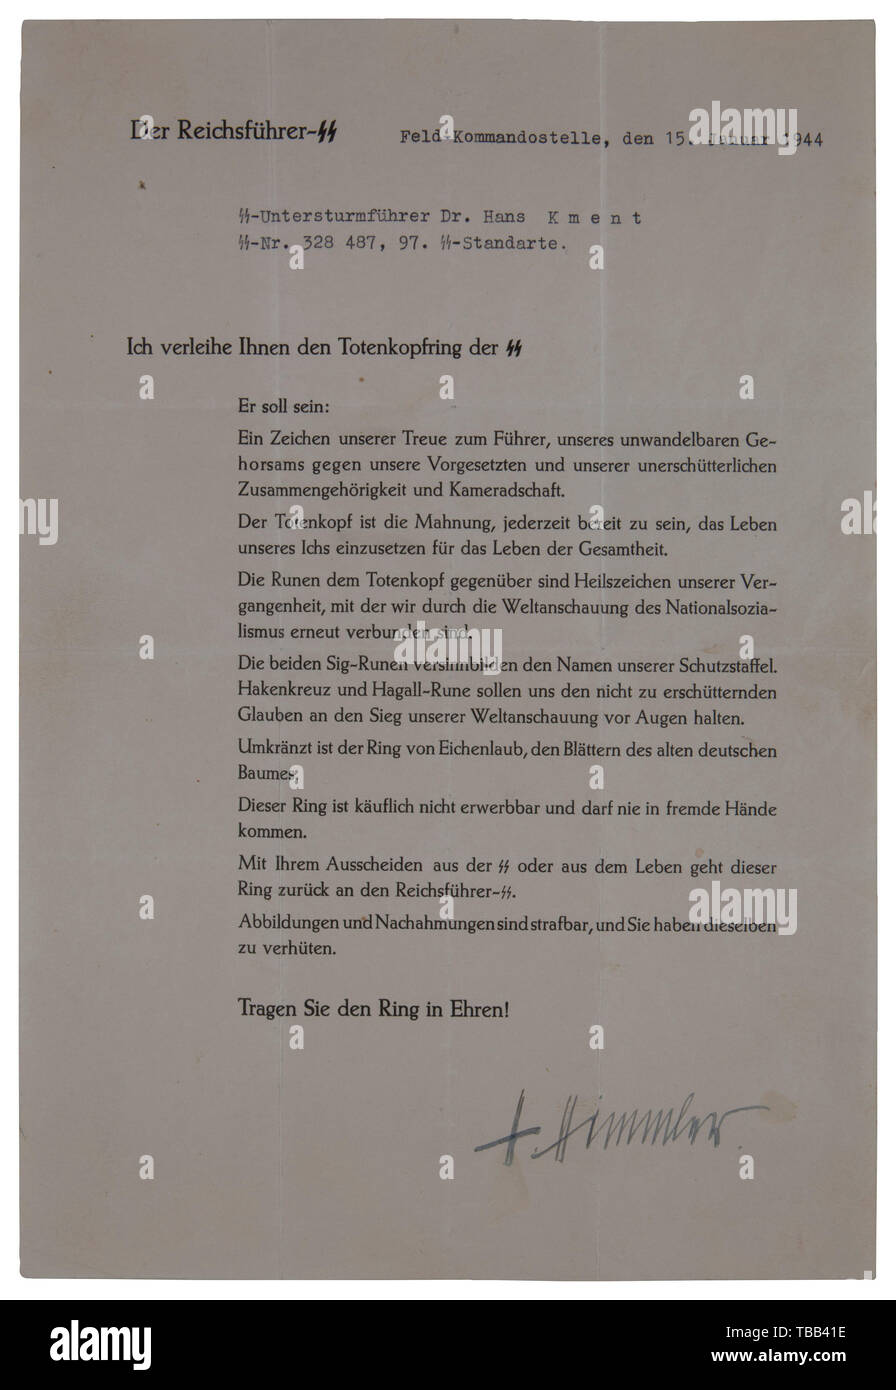 An SS honour ring document Type III, hand-signed by Reichsführer SS Heinrich Himmler, awarded 15 January 1944, 'SS-Untersturmführer Dr. Hans Kment, SS-Nr. 328 487, 97.SS-Standarte'. Size 30 x 21 cm. Cream colour paper, several fine folds. Dr. Hans Kment was a physician with WW I experience as an Oberleutnant and fought in the Kradschützen Regiment of 'Das Reich' during WW II. USA-lot, see page 5. historic, historical, 20th century, 1930s, 1940s, Waffen-SS, armed division of the SS, armed service, armed services, NS, National Socialism, Nazism, Third Reich, German Reich, Ger, Editorial-Use-Only Stock Photo